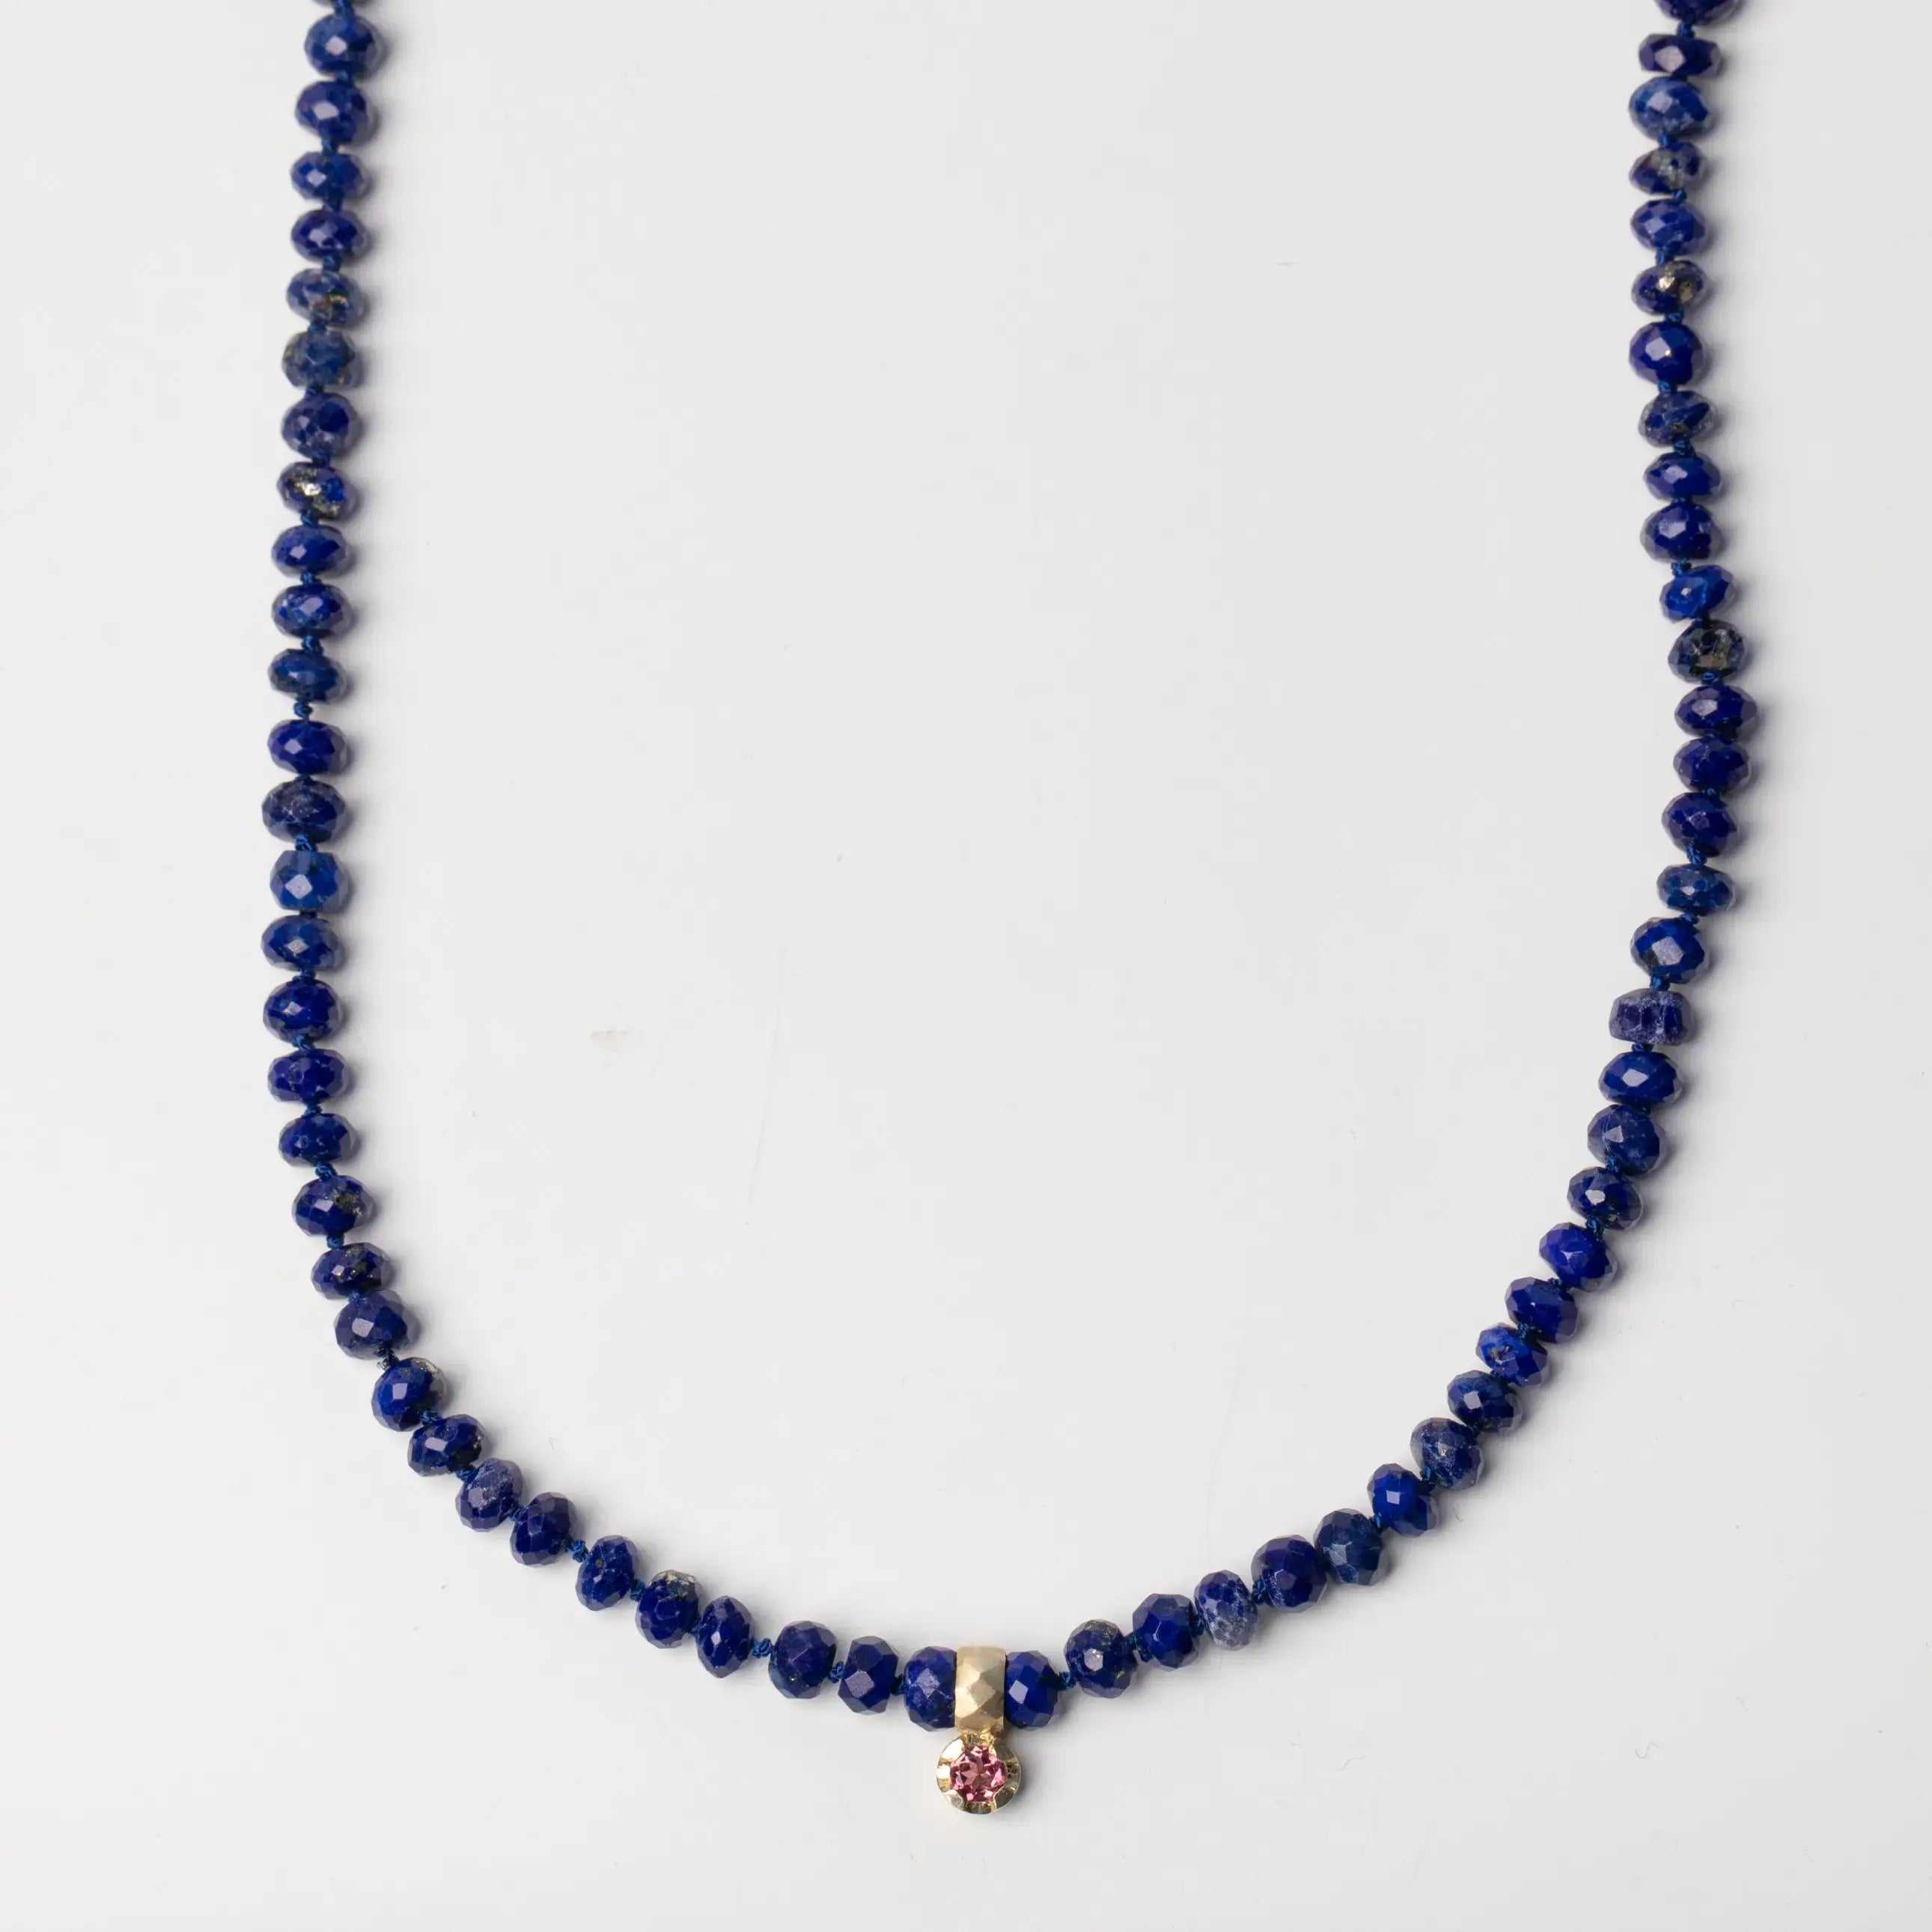 14K Gold Necklace Lapis and Pink Tourmaline